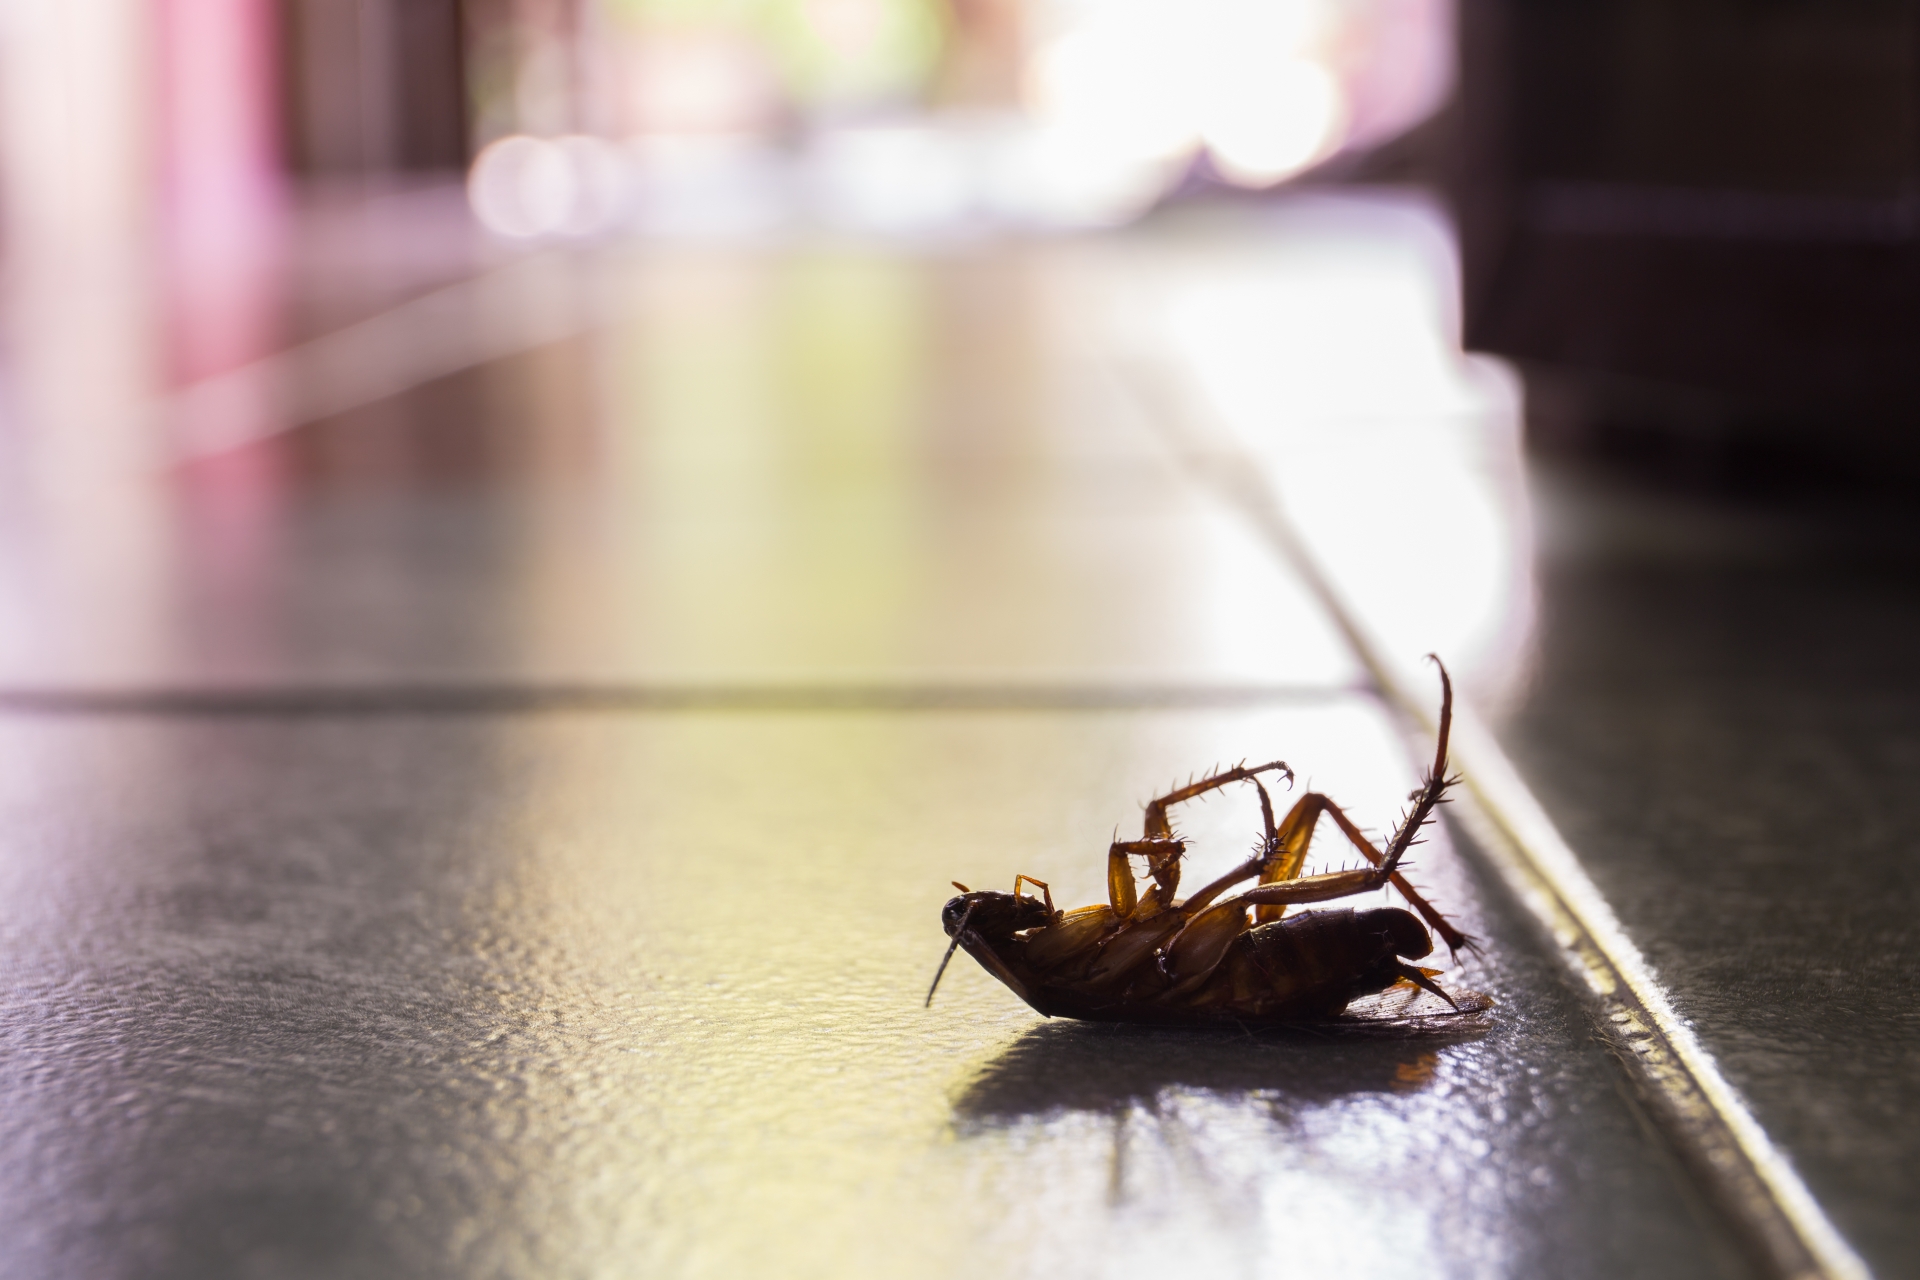 Cockroach Control, Pest Control in Radlett, Shenley, WD7. Call Now 020 8166 9746